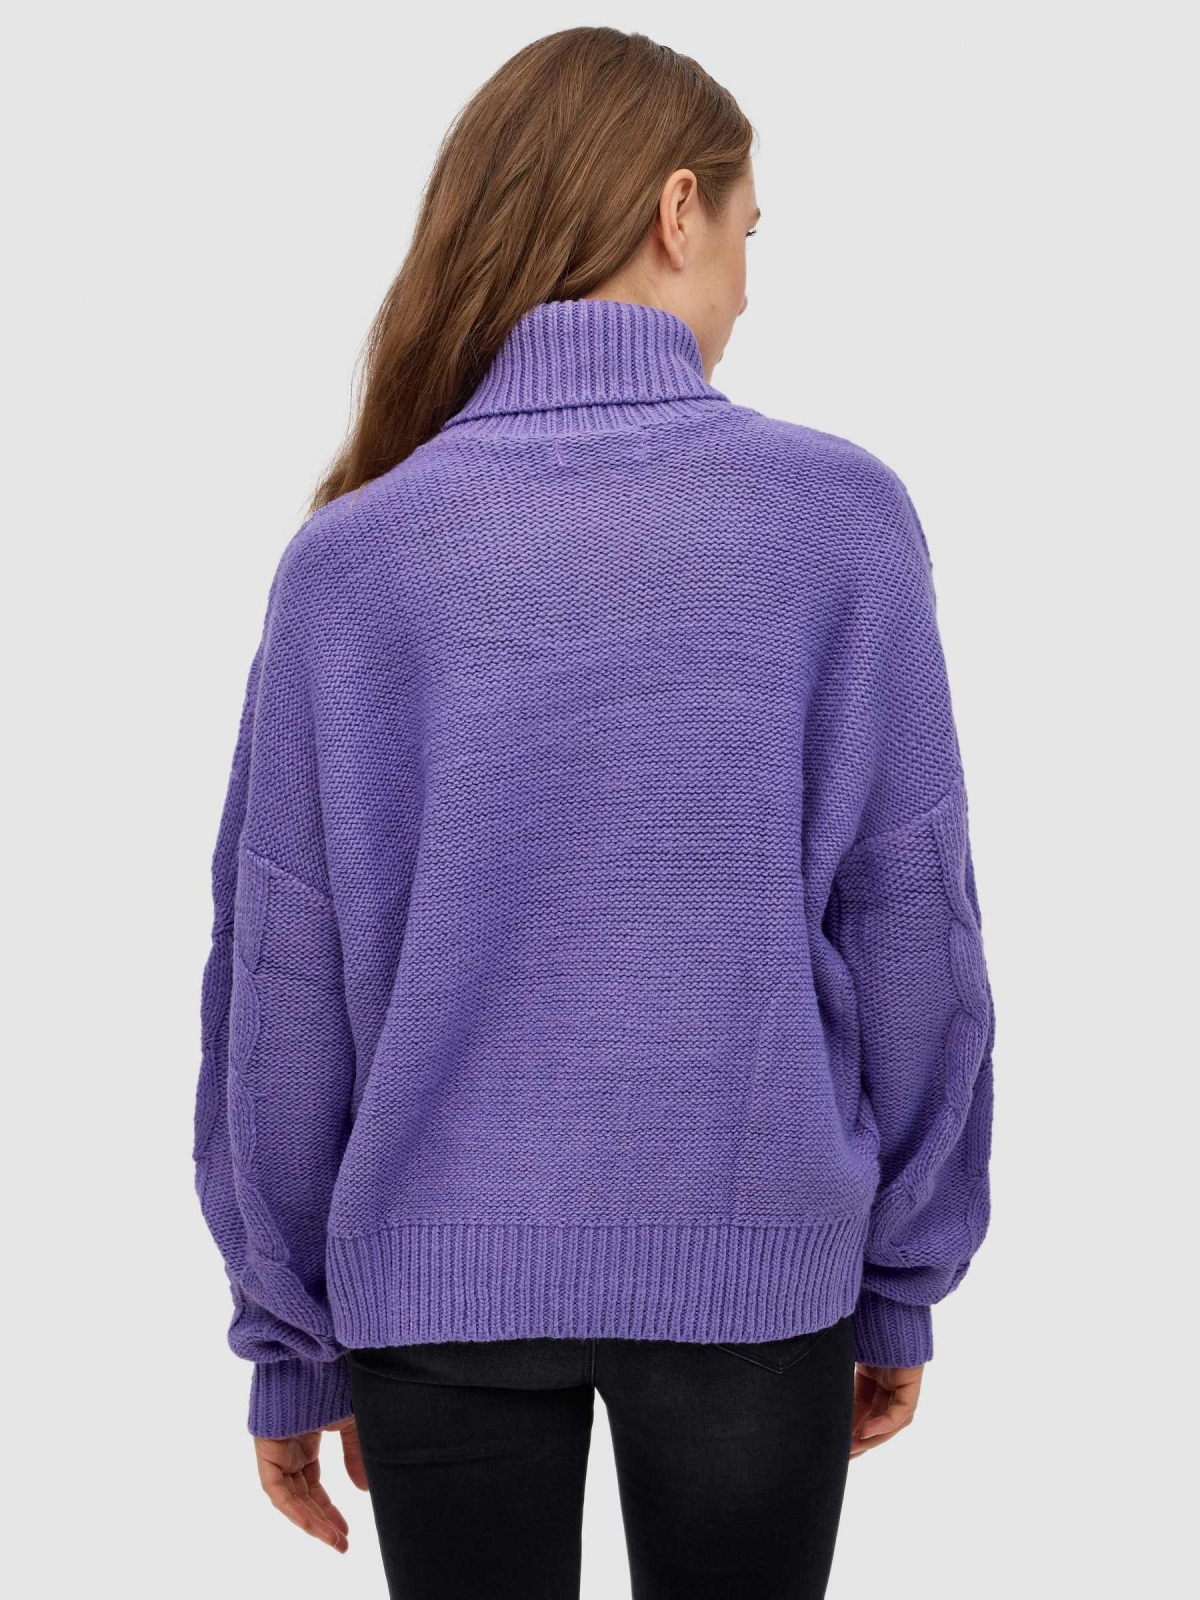 Sweater turn-down collar eights lilac middle back view